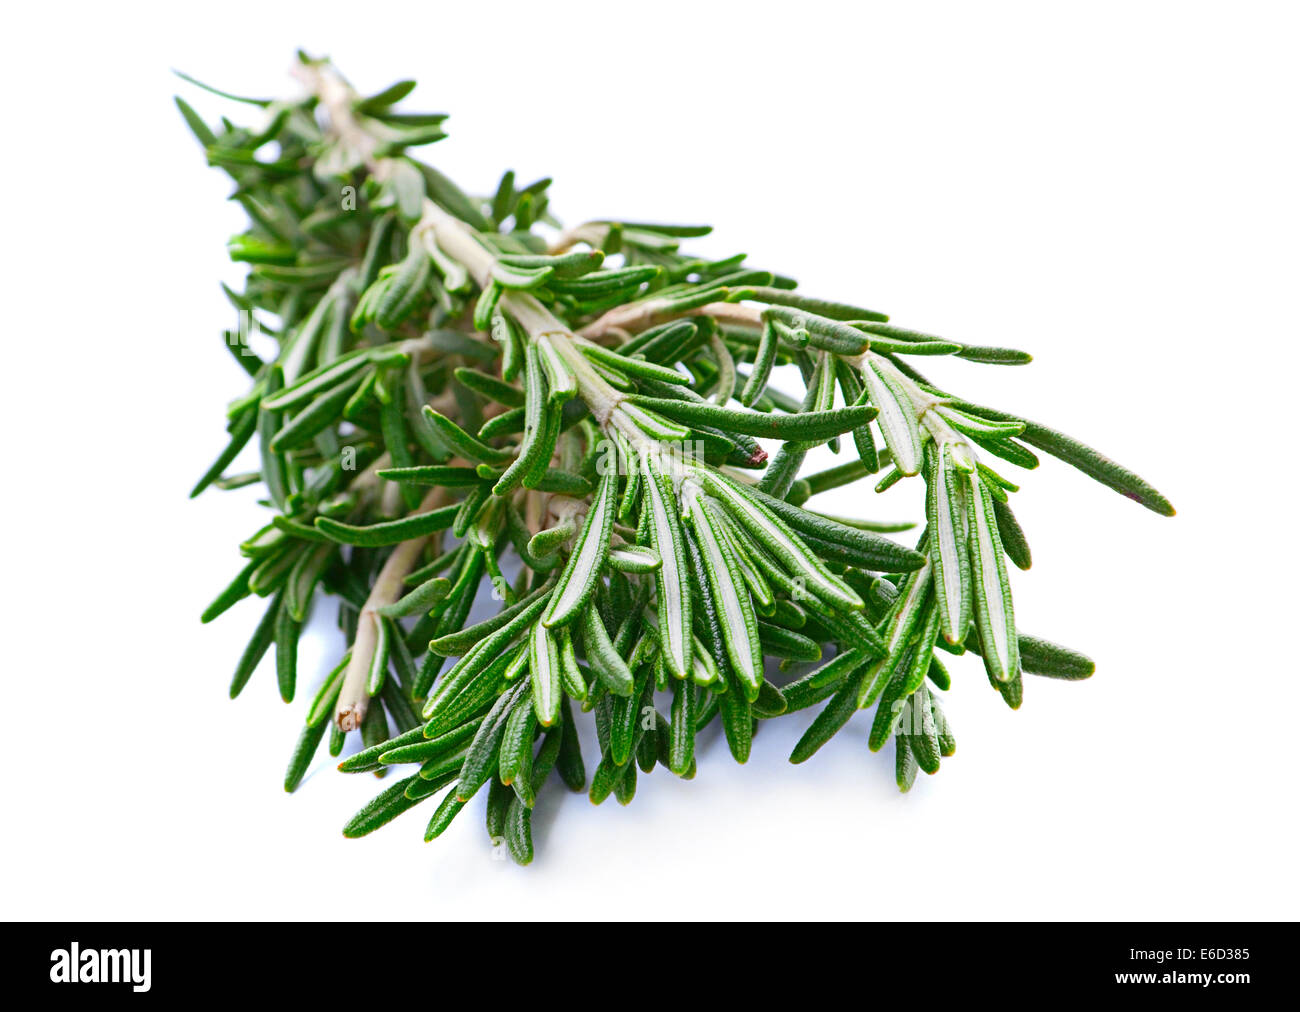 Rosemary herb closeup isolated on white background Stock Photo